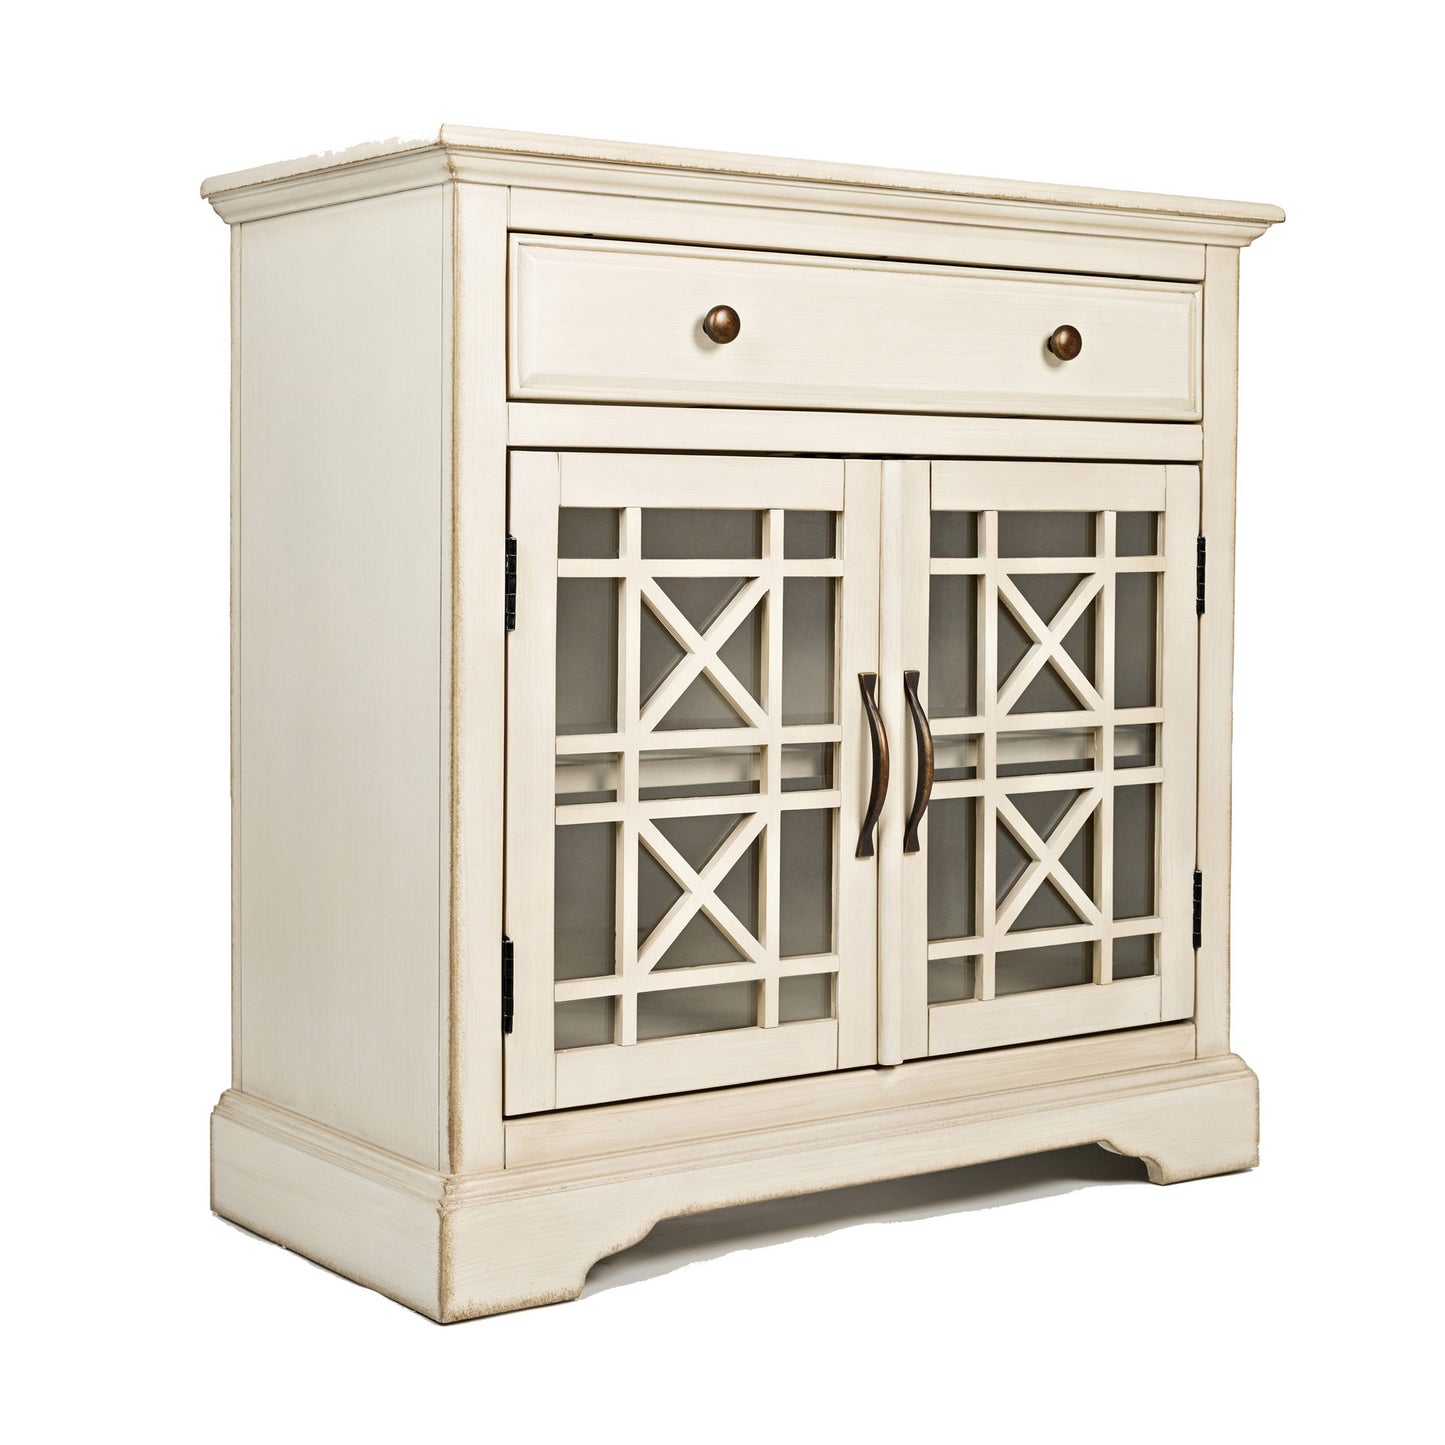 Koi 32 Inch Acacia Wood Accent Cabinet Console, 2 Fretwork Tempered Glass Doors, 1 Shelf, Antique White